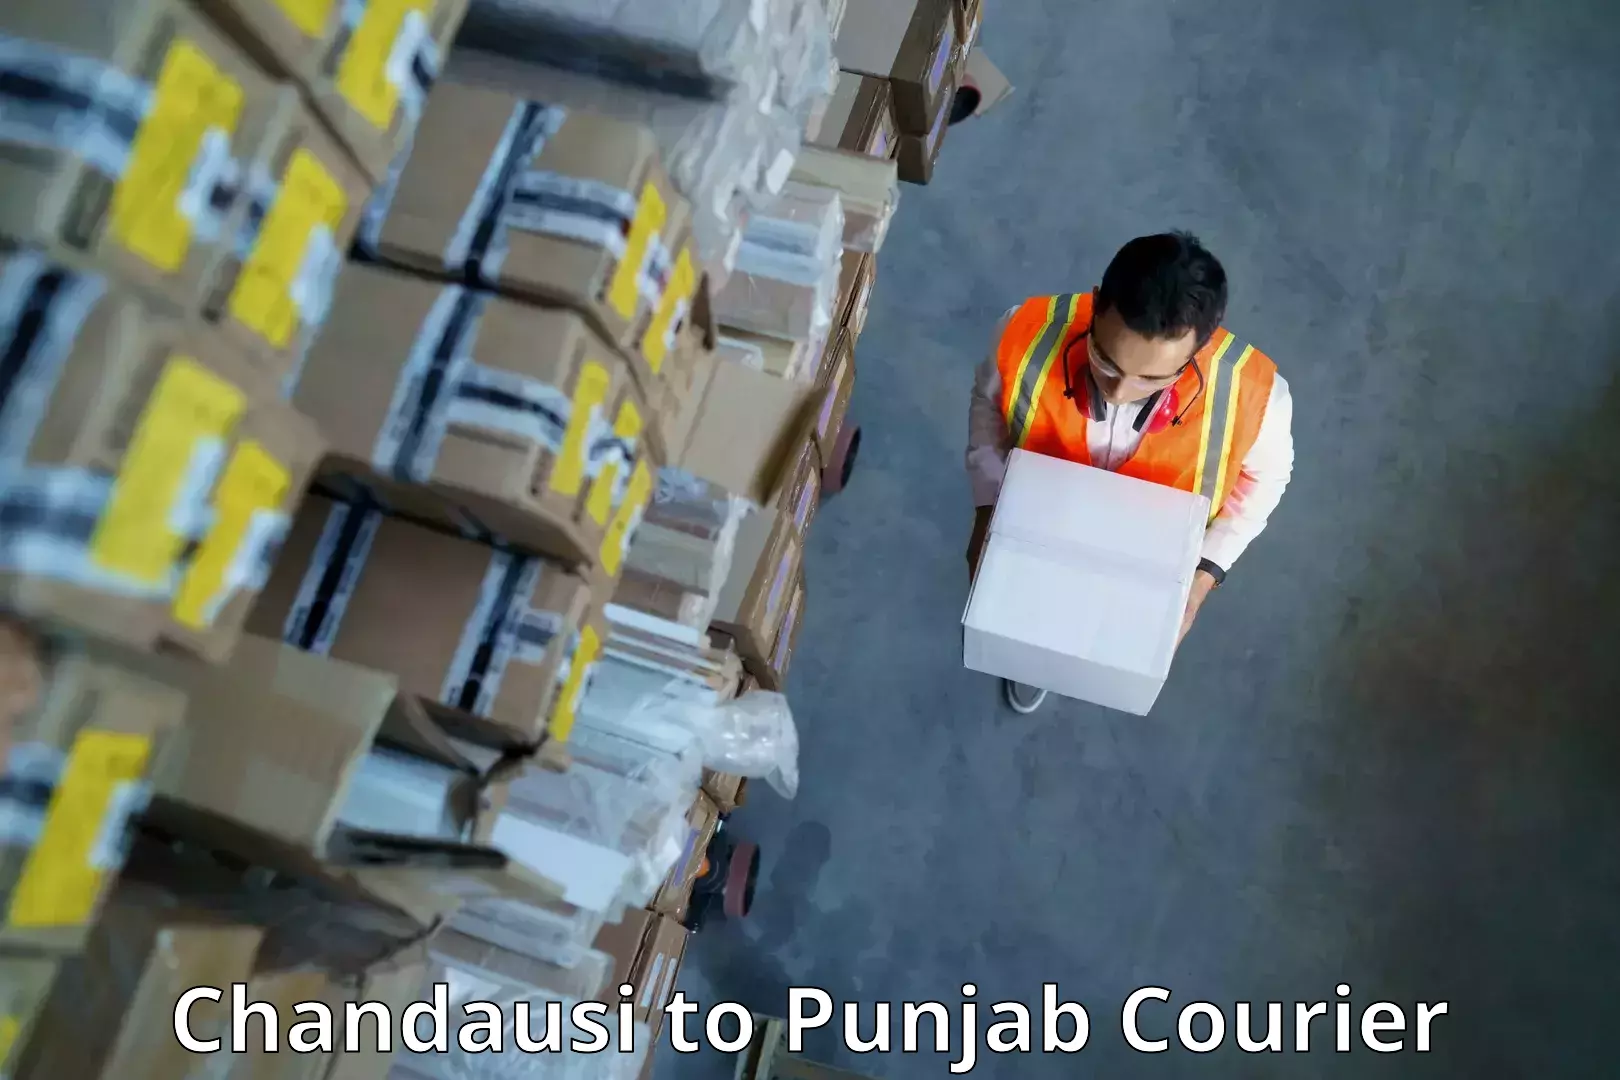 State-of-the-art courier technology Chandausi to Ropar